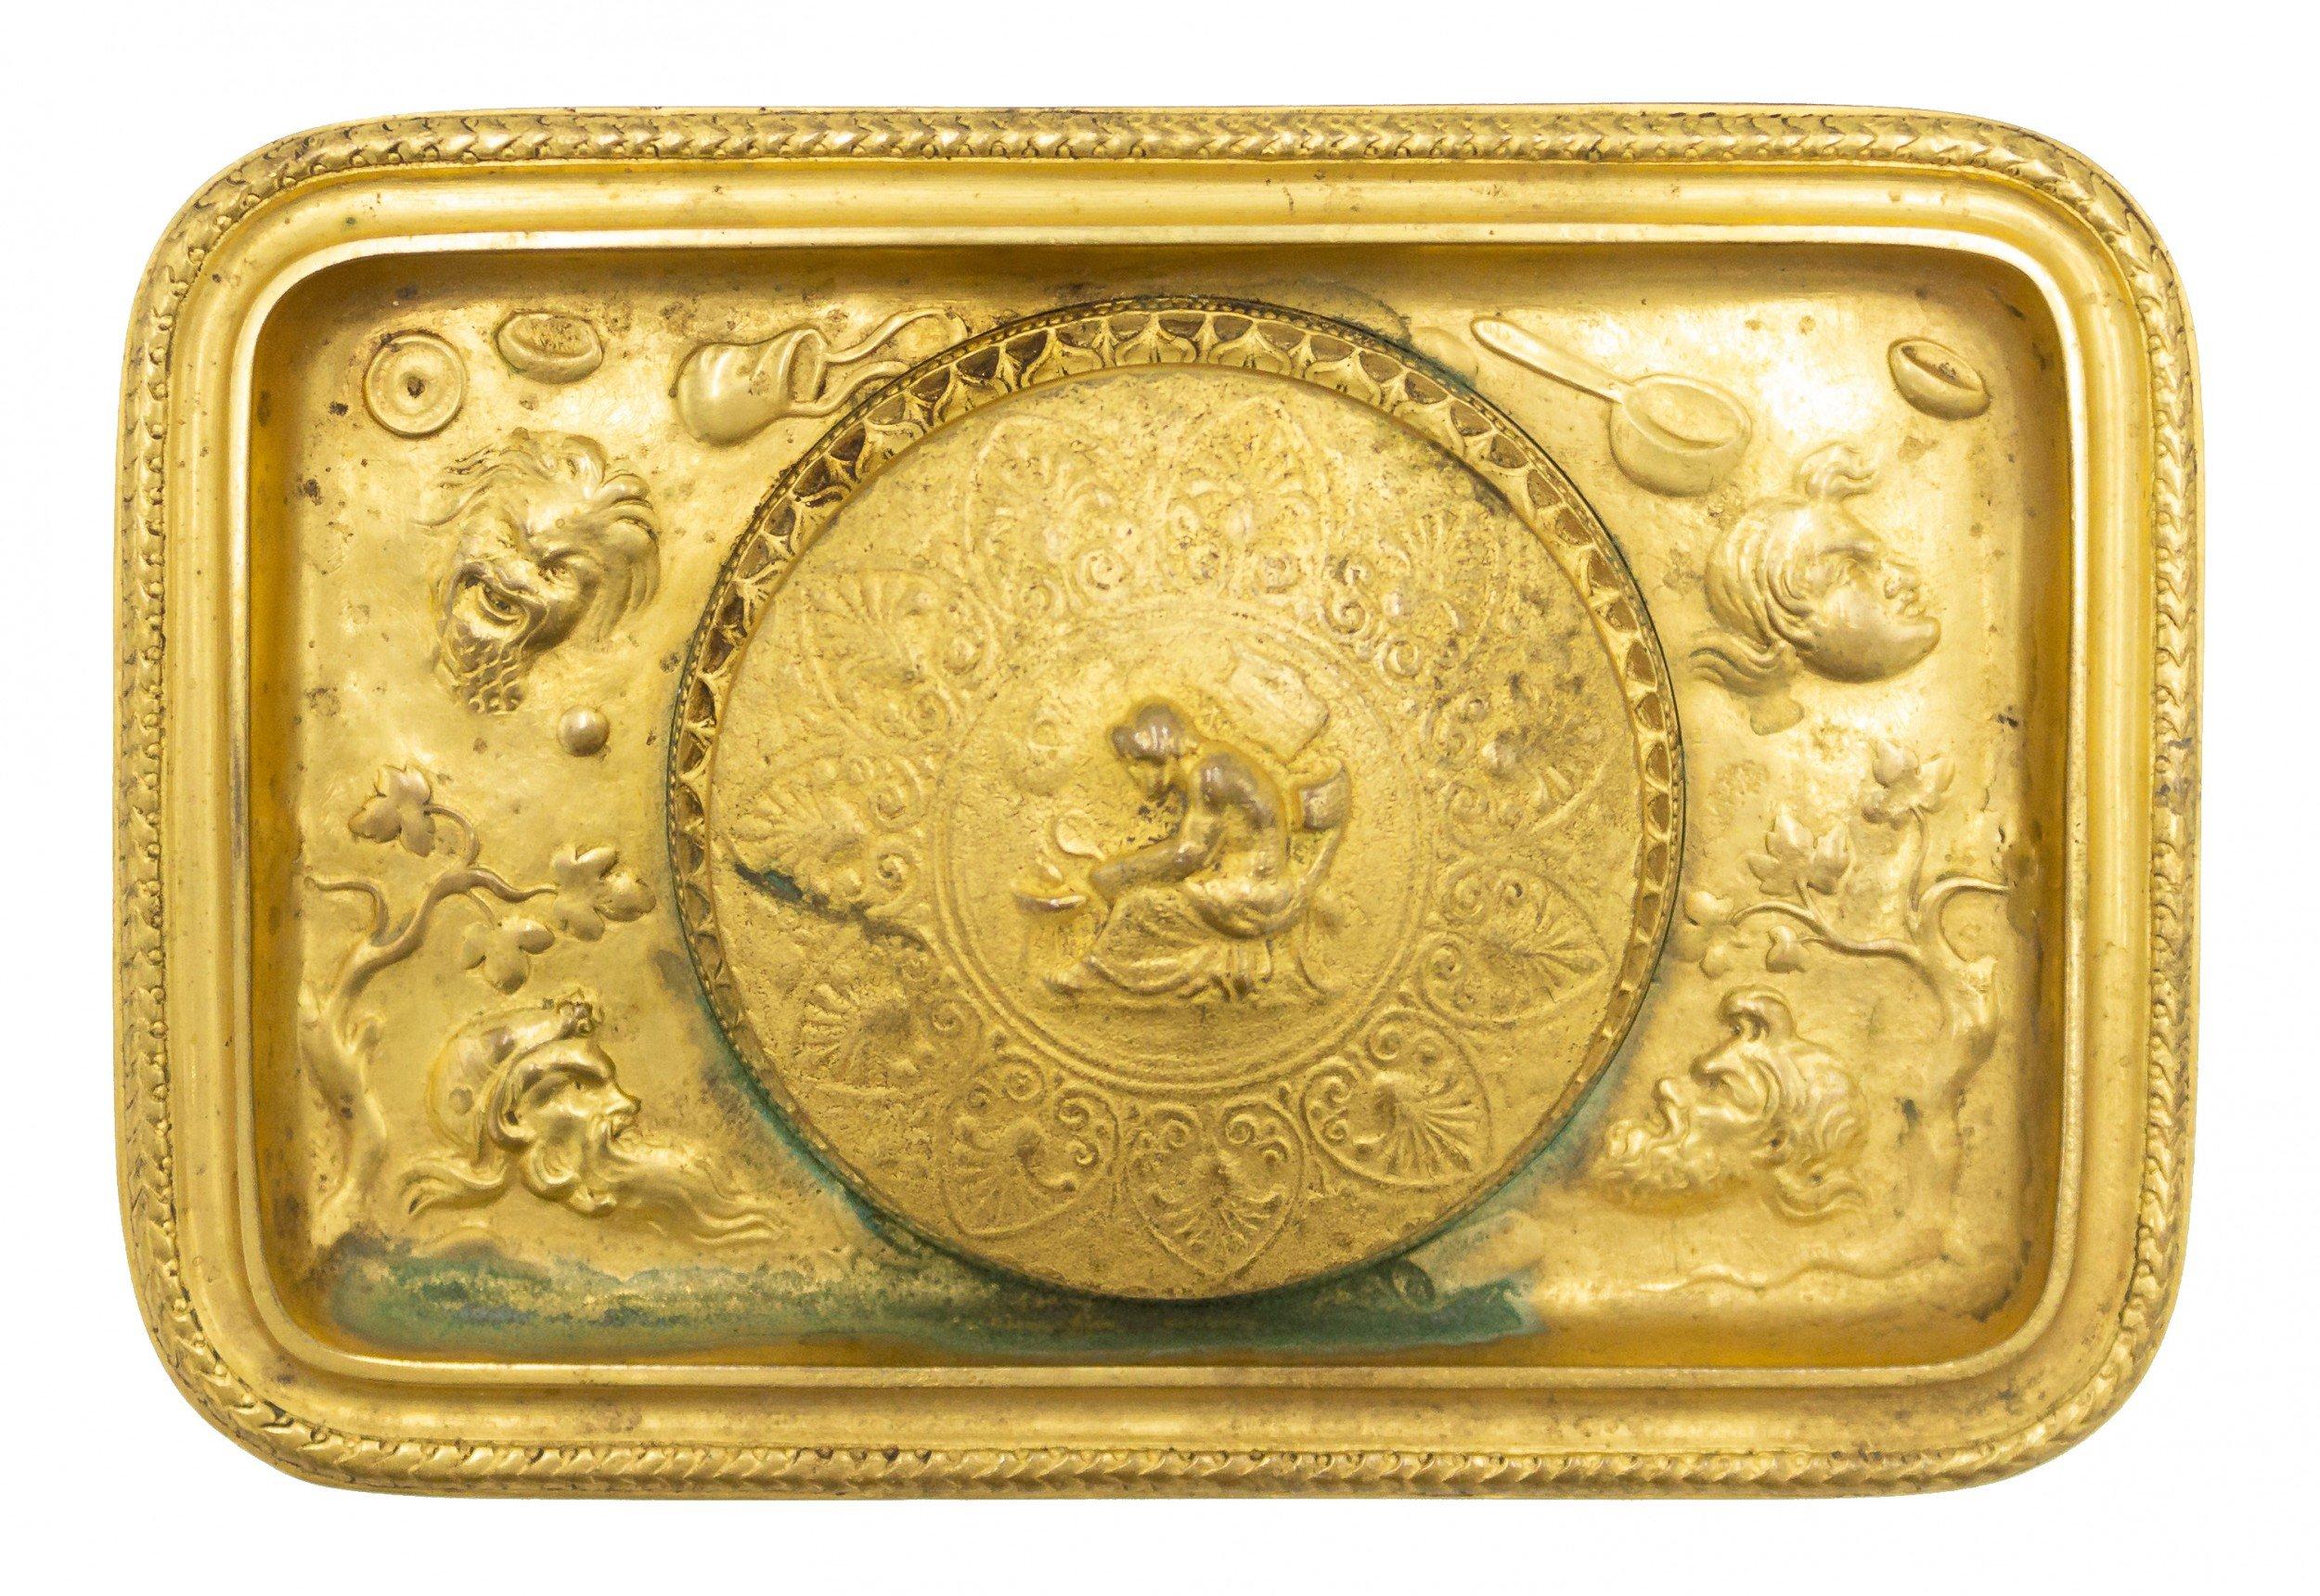 French Empire-style (19th century) bronze dore rectangular inkwell on 4 clawed feet with relief (signed BARBEDIENNE).
 